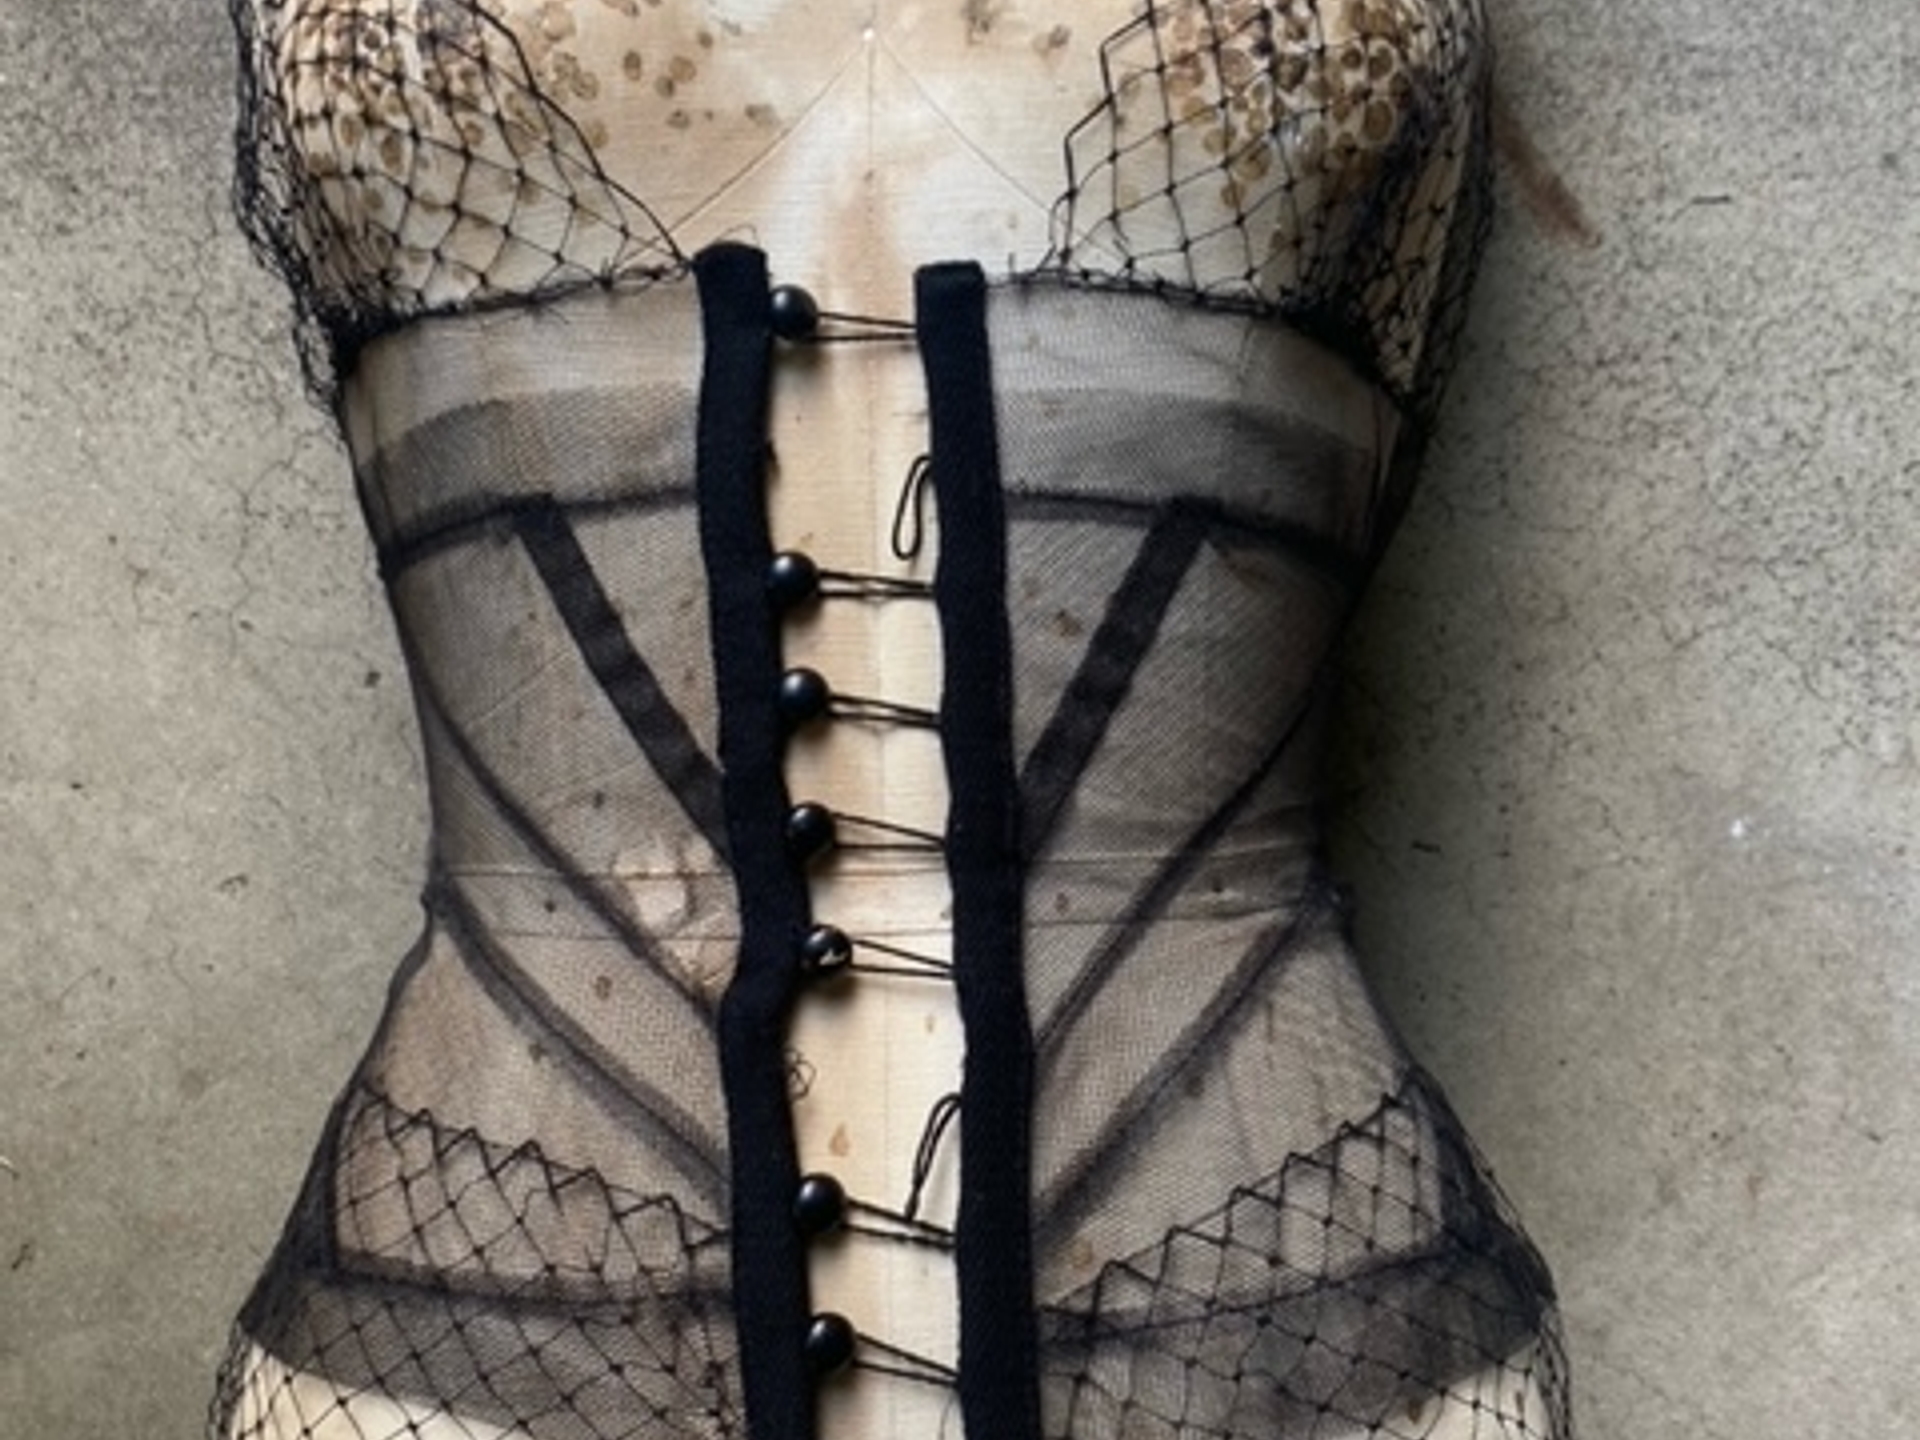 The infamous RO corset, sent over by his former fitting model Dafne 